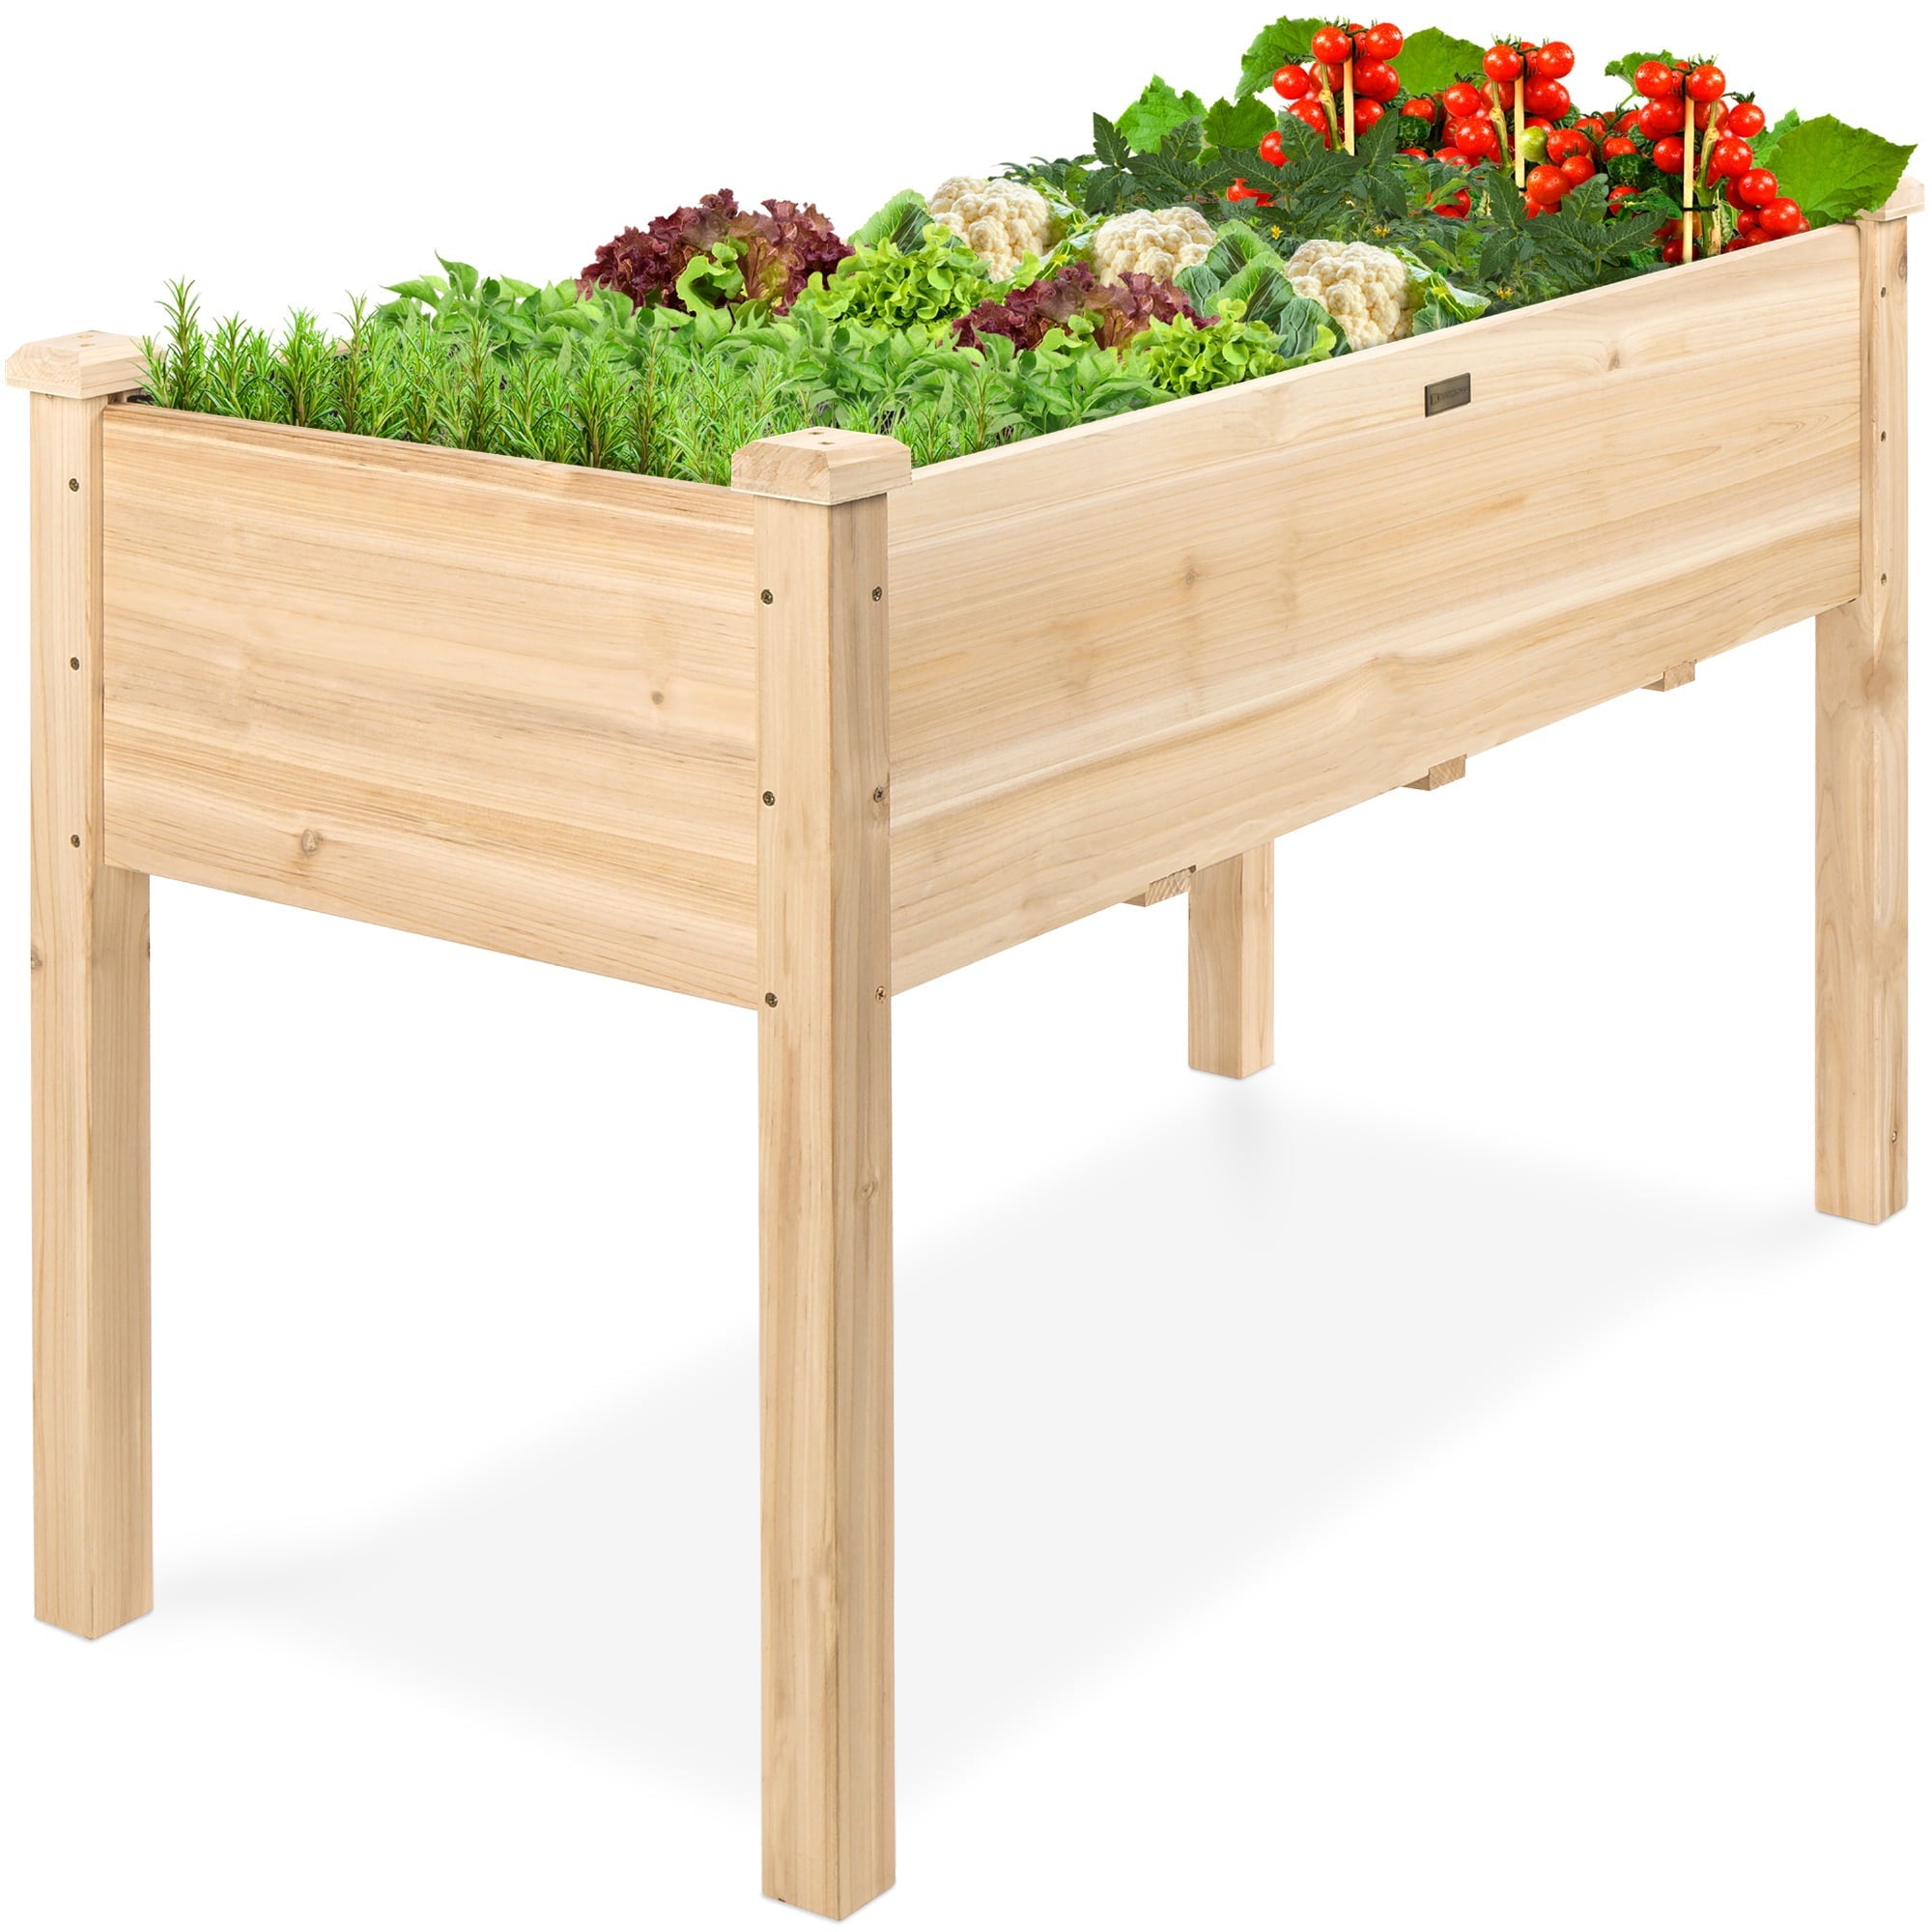 Best Choice Products 48.5x24x30in Elevated Raised Wood Planter Garden Bed Box Stand for Backyard, Patio - Natural